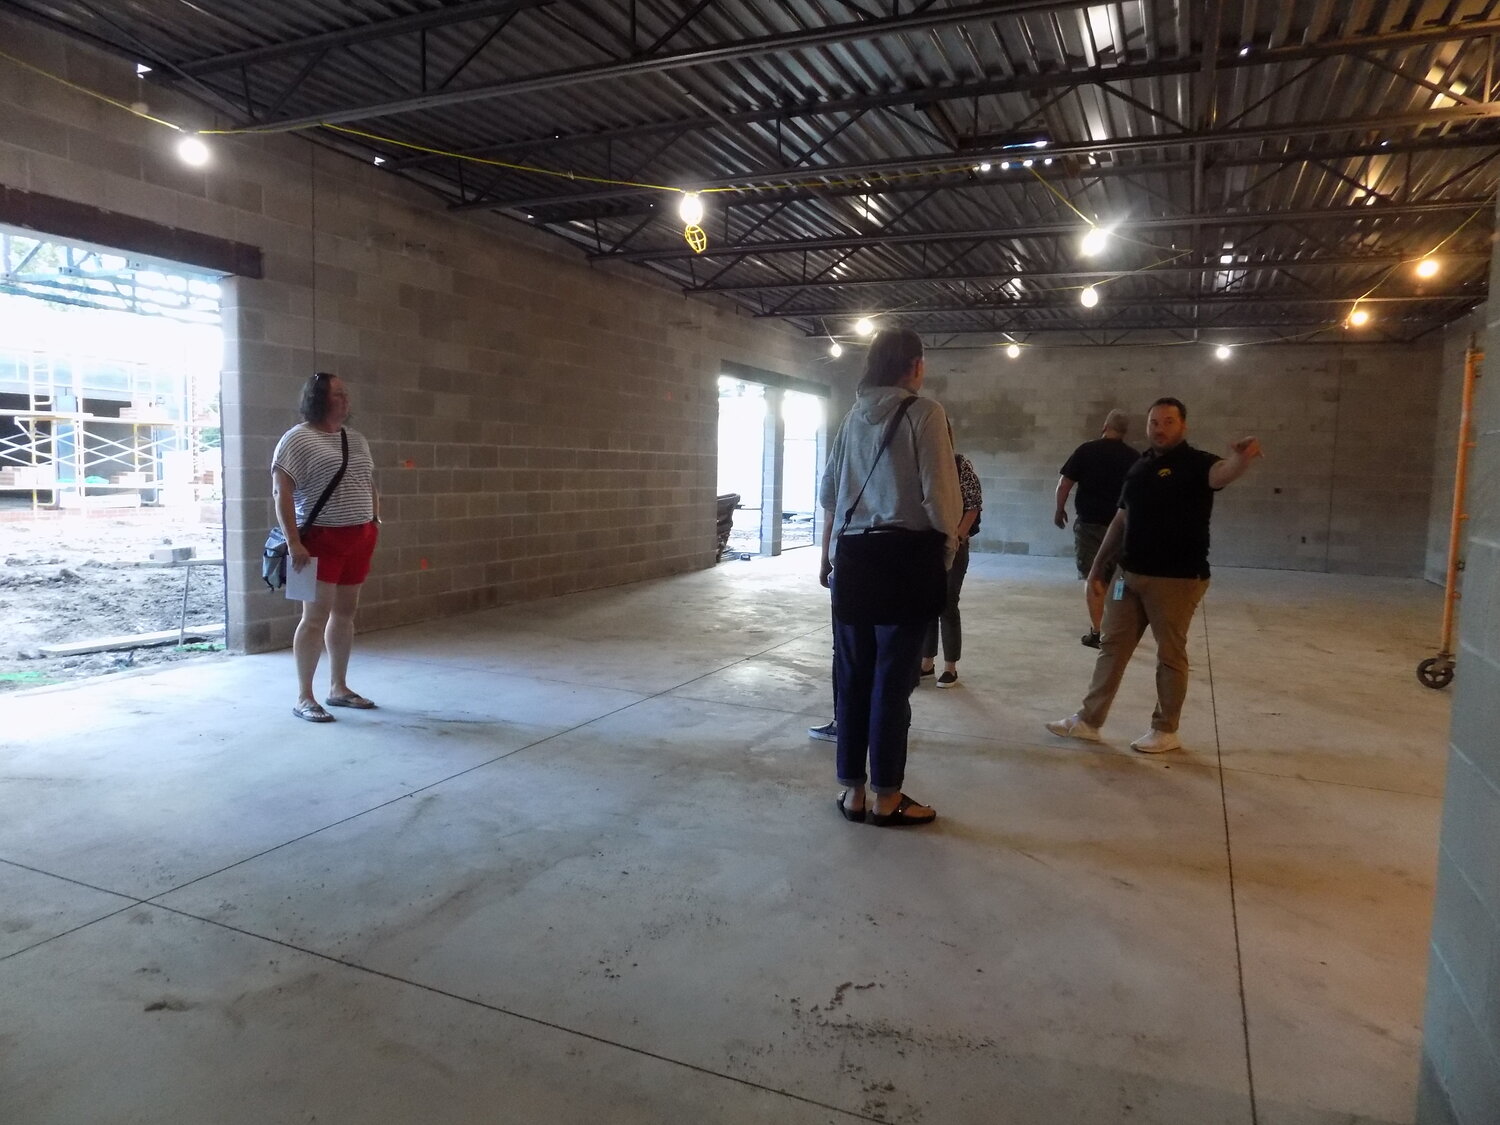 Board members also had the opportunity to walk through the new construction, which is expected to be completed for use next school year.  At the Middle School, board members walked through the new Family and Consumer Science classroom, STEM classroom, and classrooms for grades 5 and 7/8.